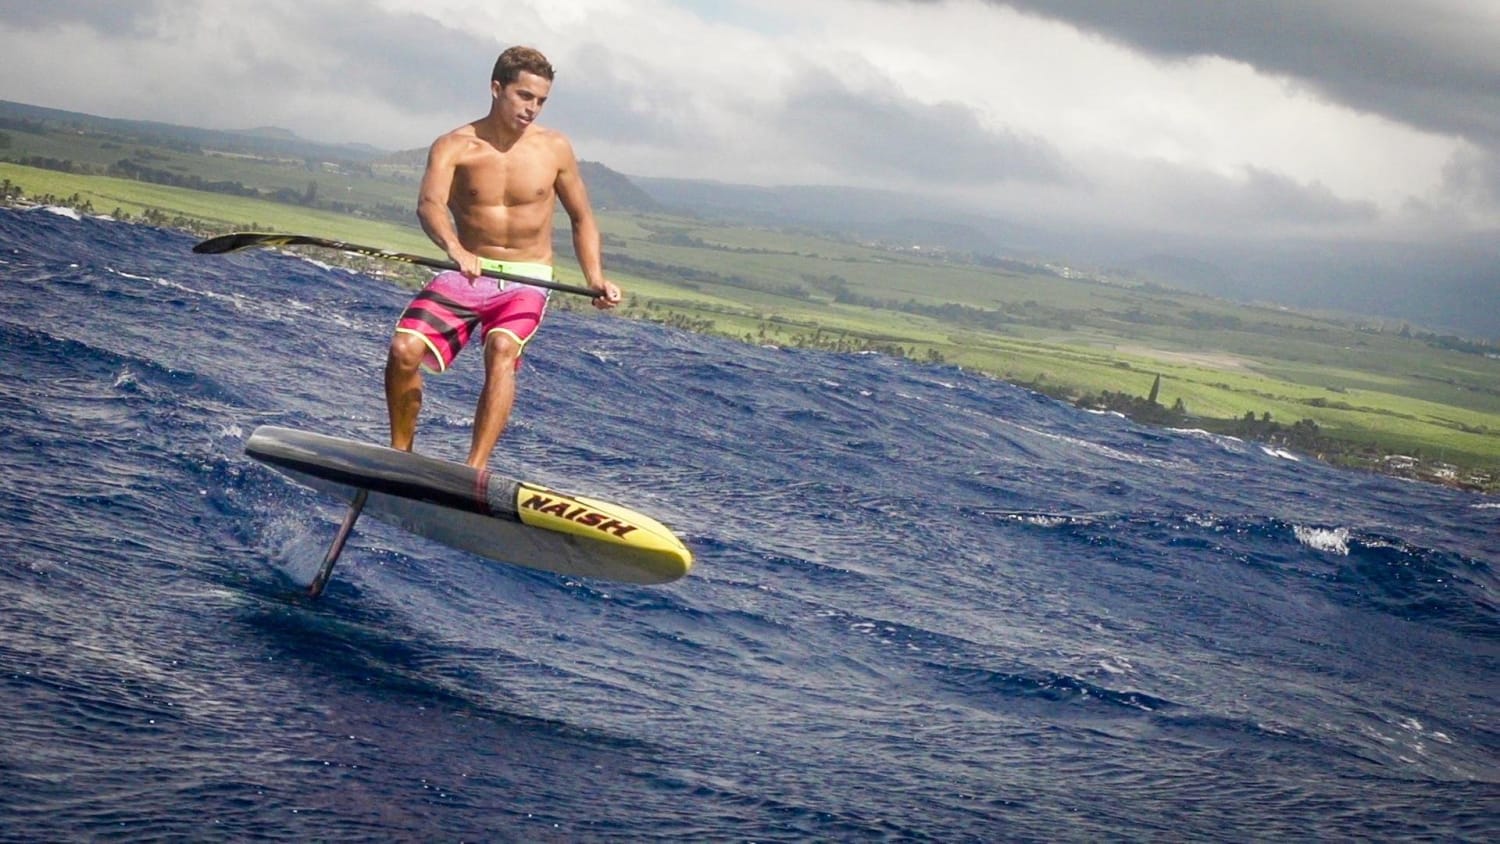 Watch a stand-up paddle in fly water board the